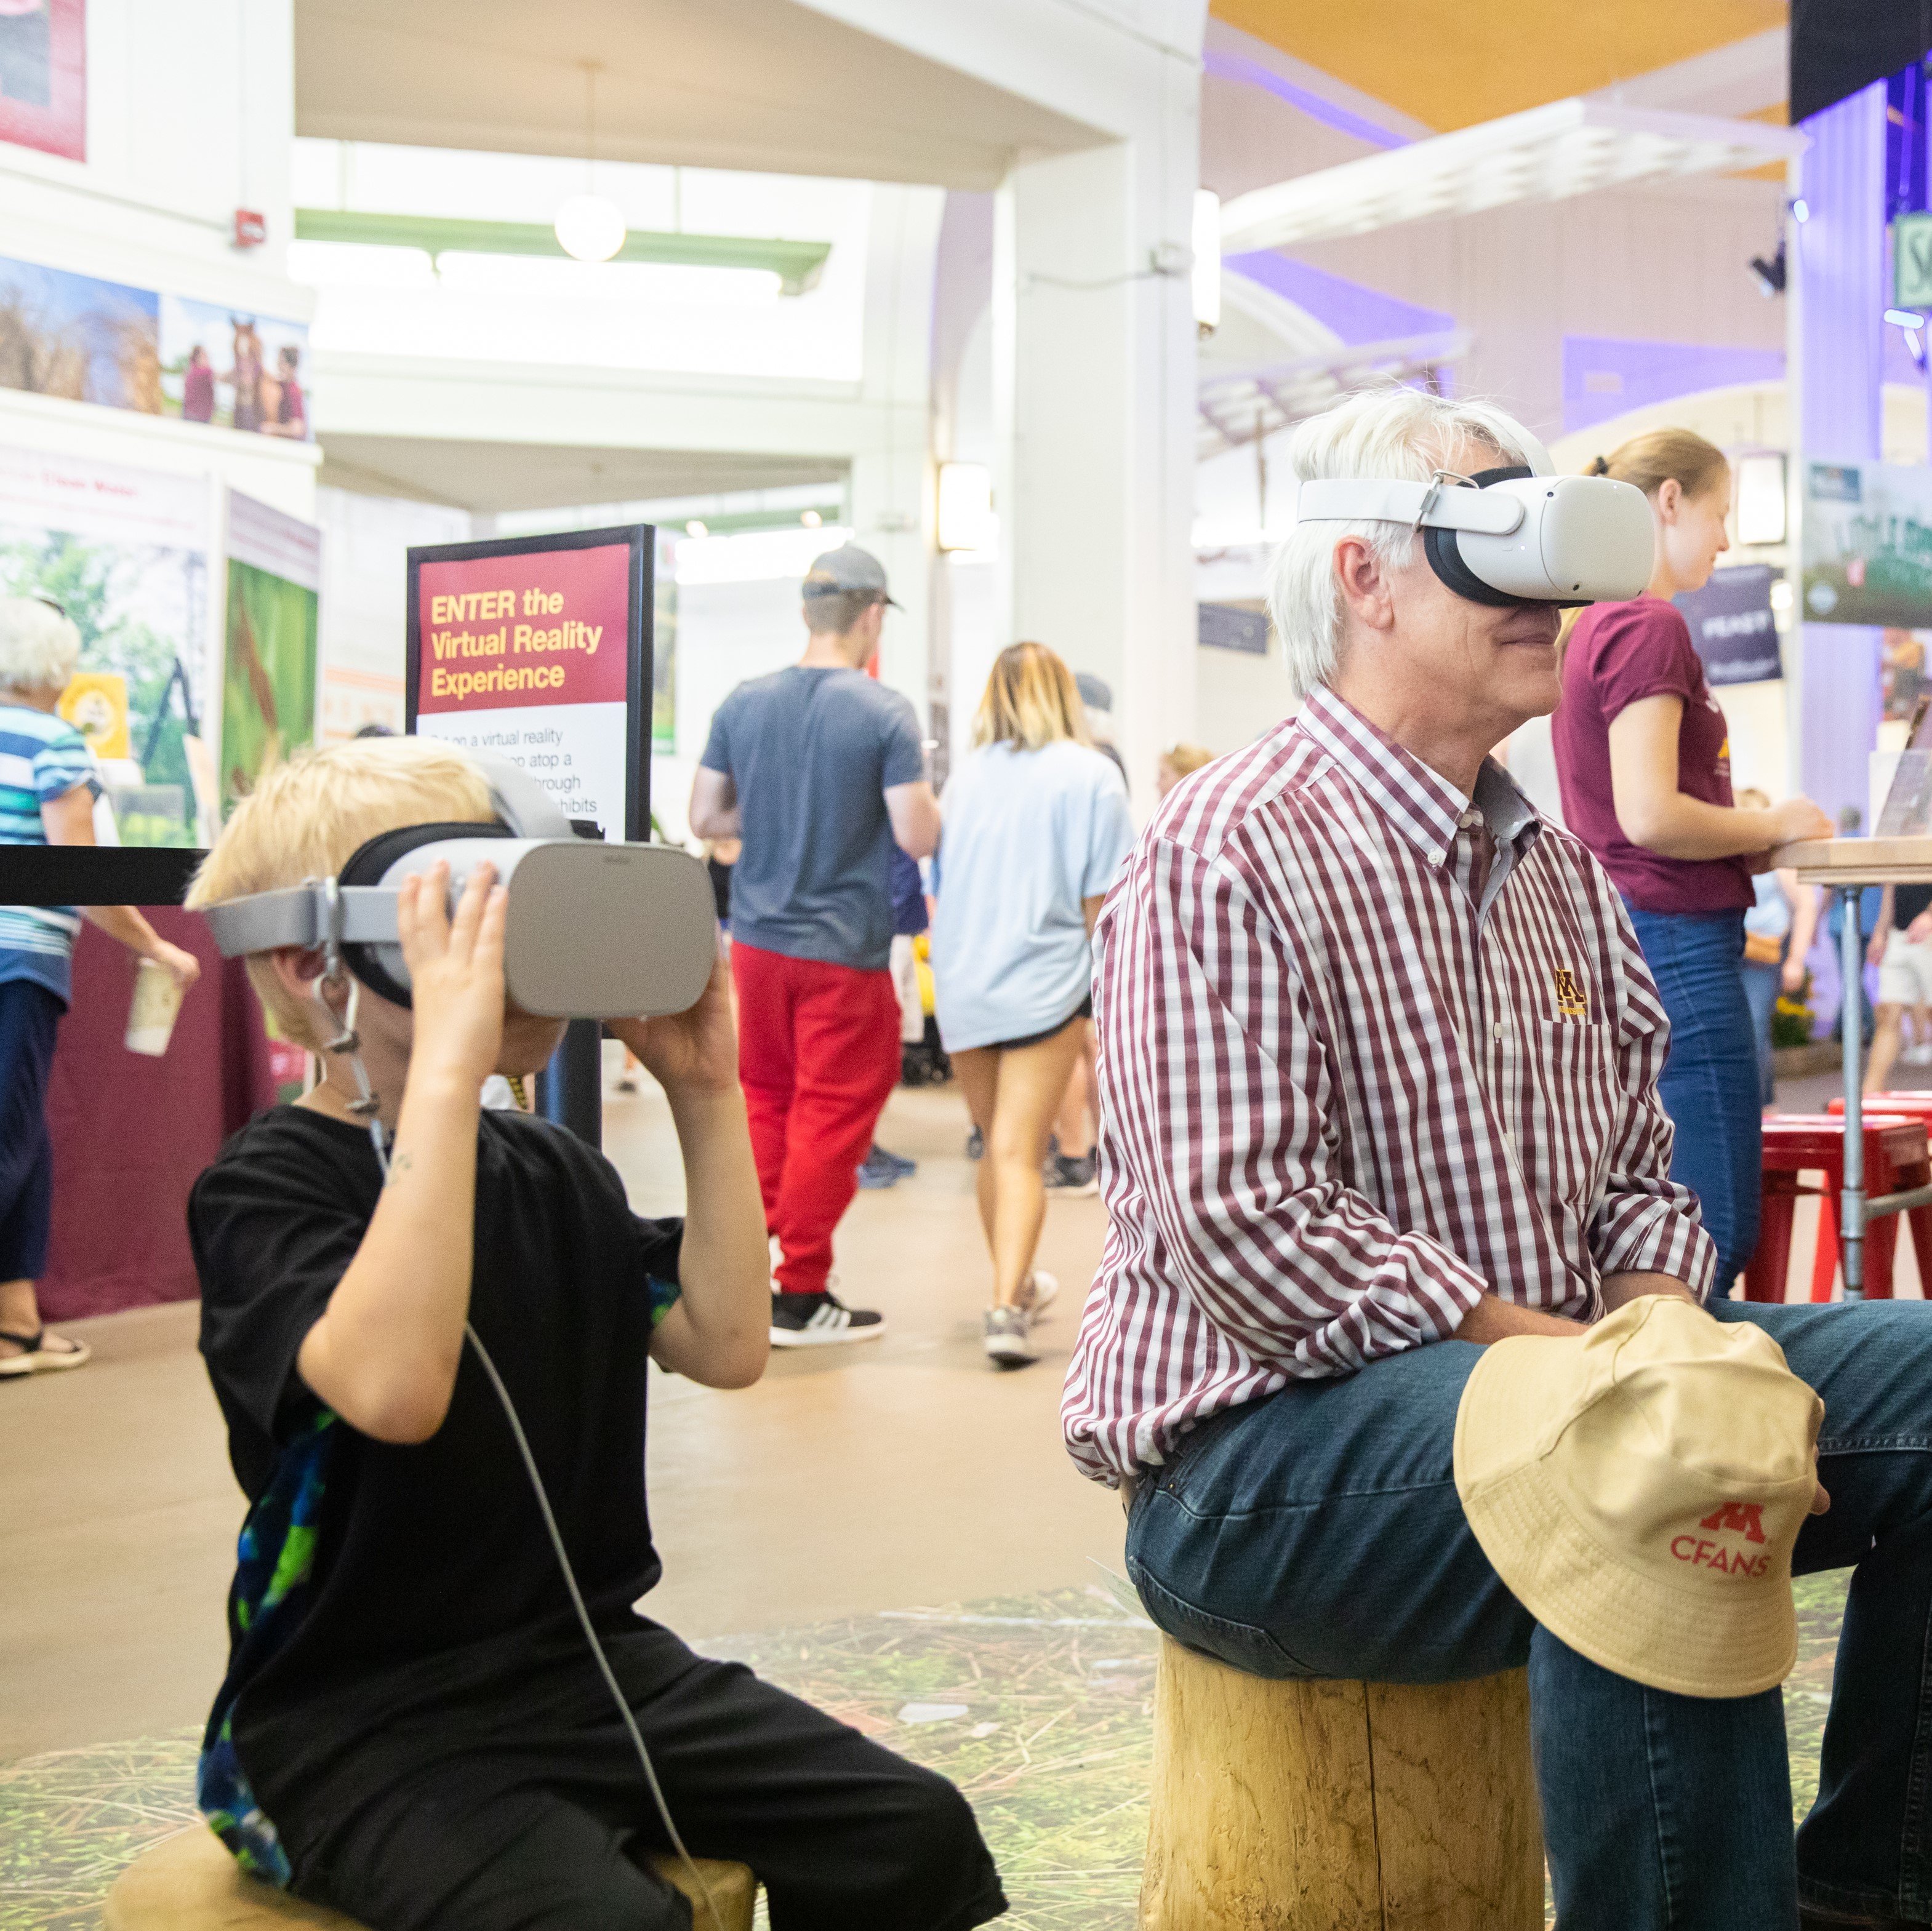 A photo of two State Fair visitors experiencing virtual reality